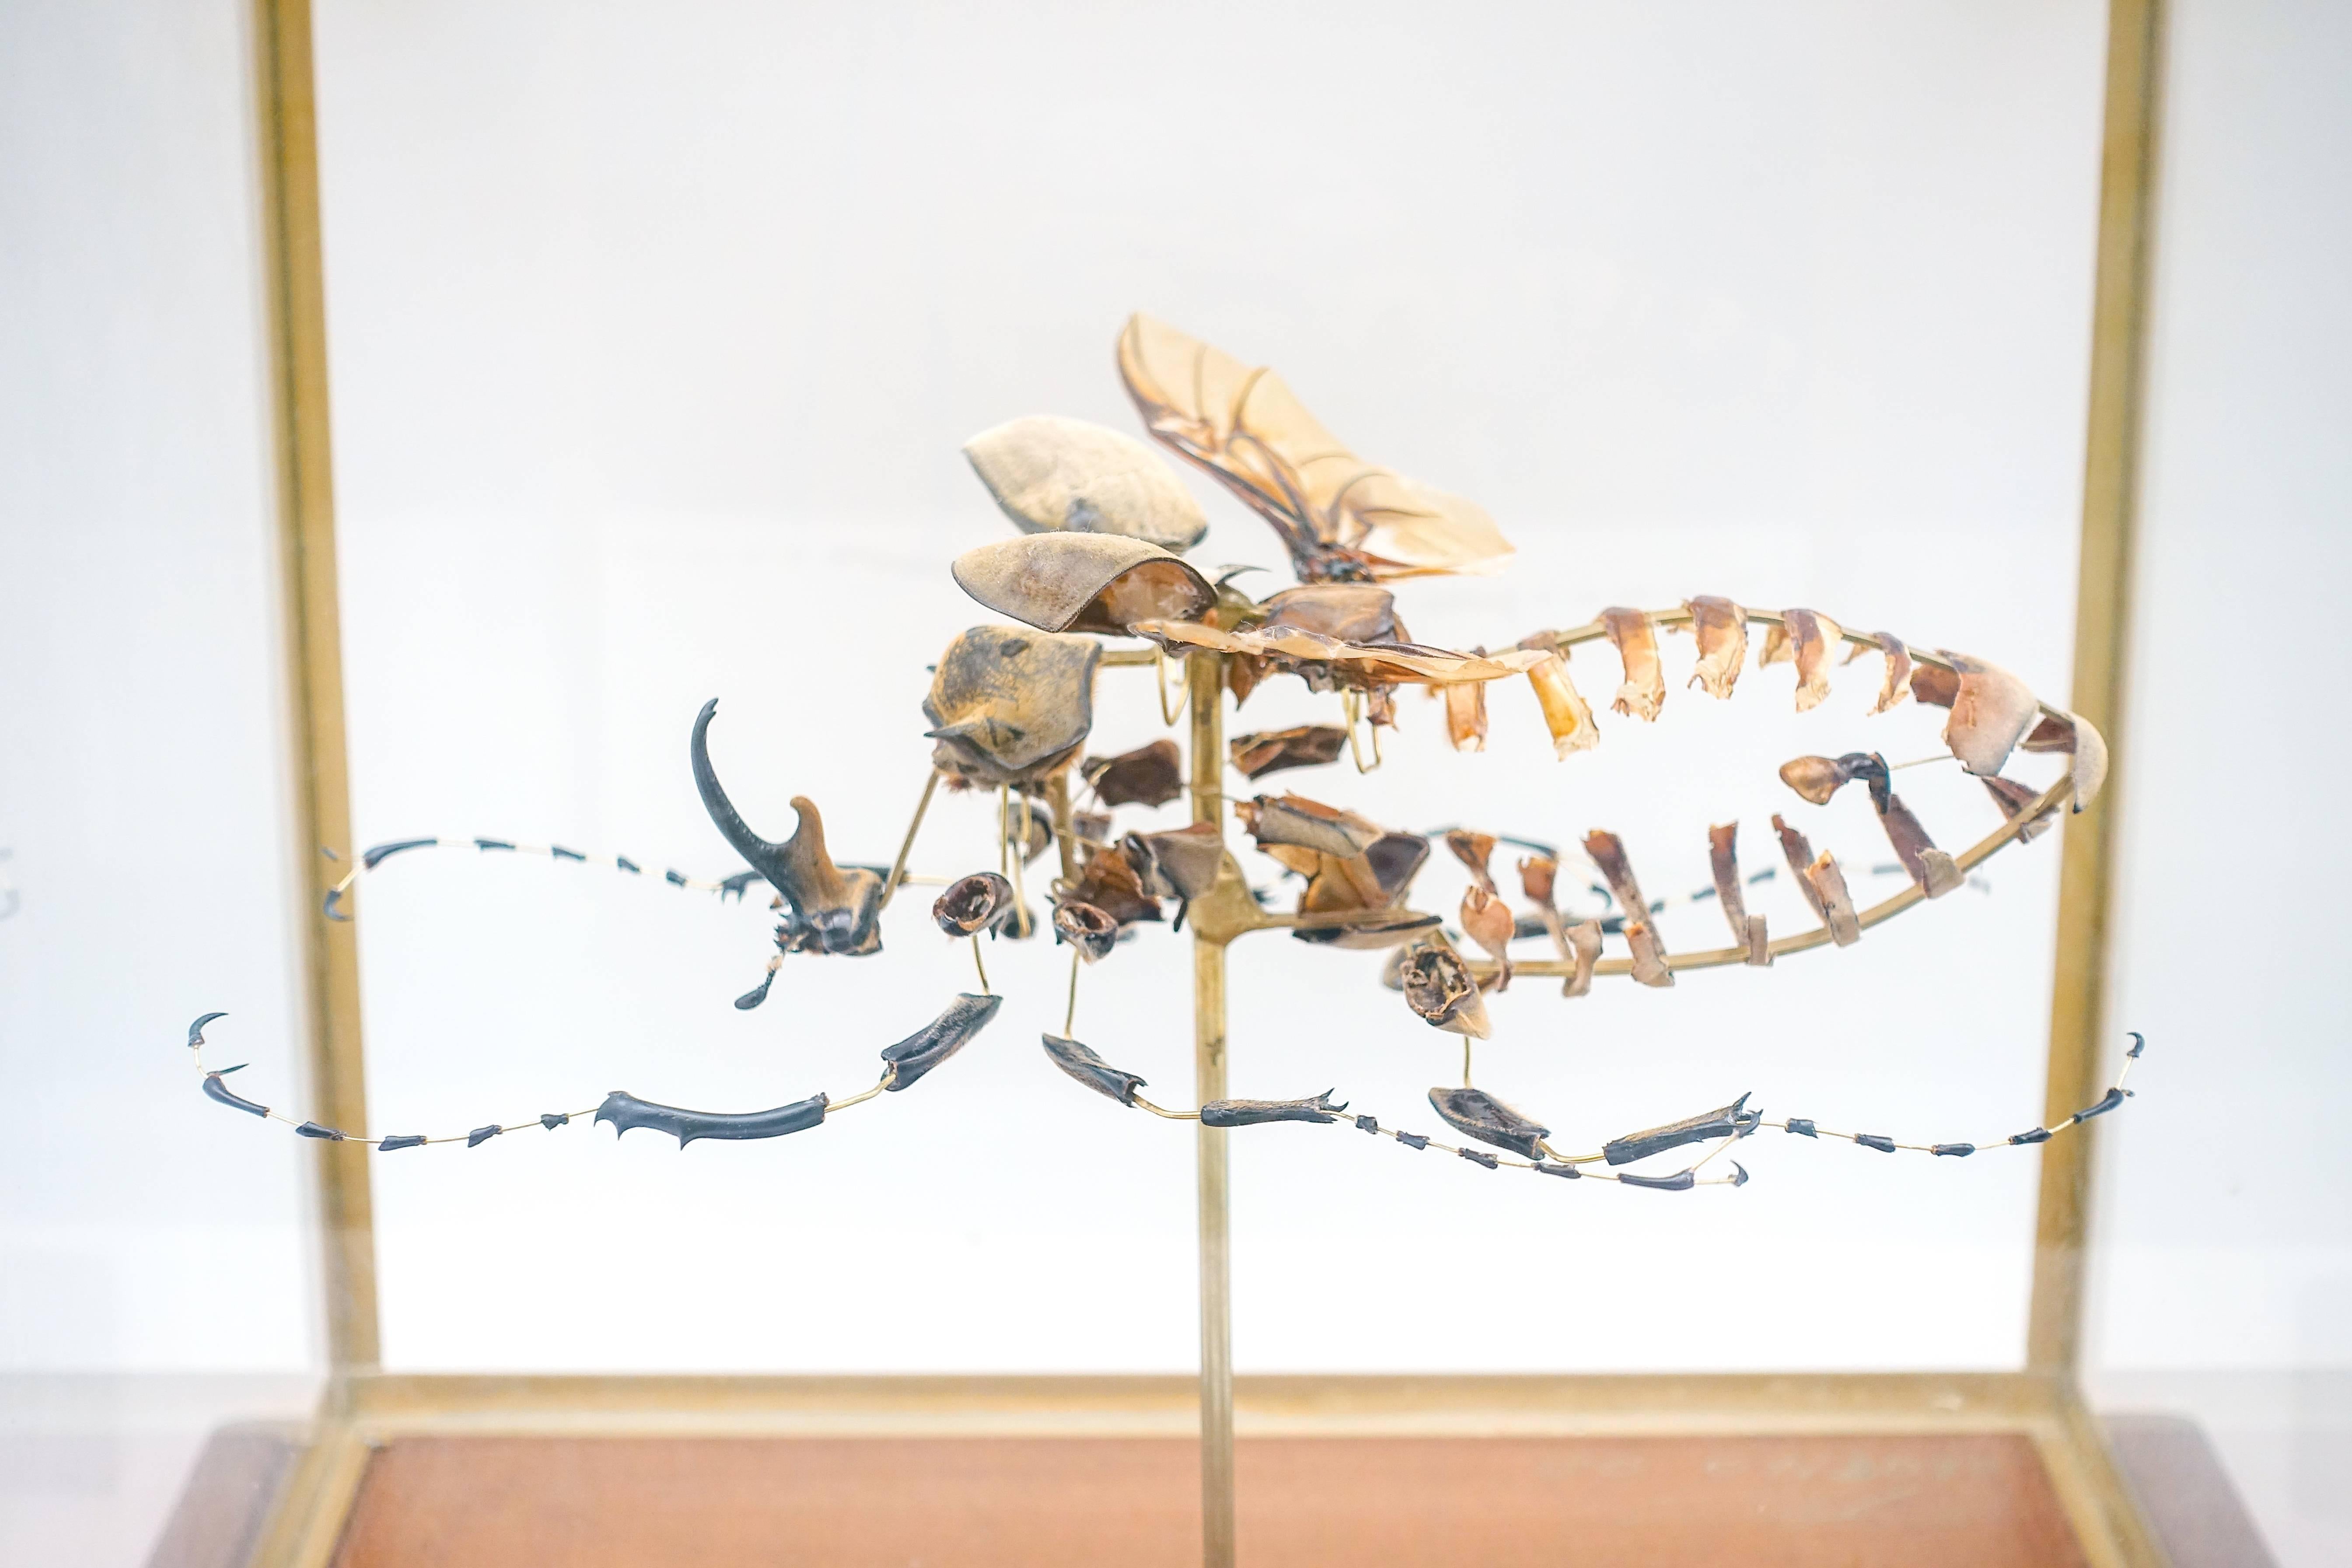 Deconstructed elephant beetle (Megasoma Elephas) in a glass case by Olivier Violo. Meticulously mounted in the style of French anatomist Claude Beauchene.